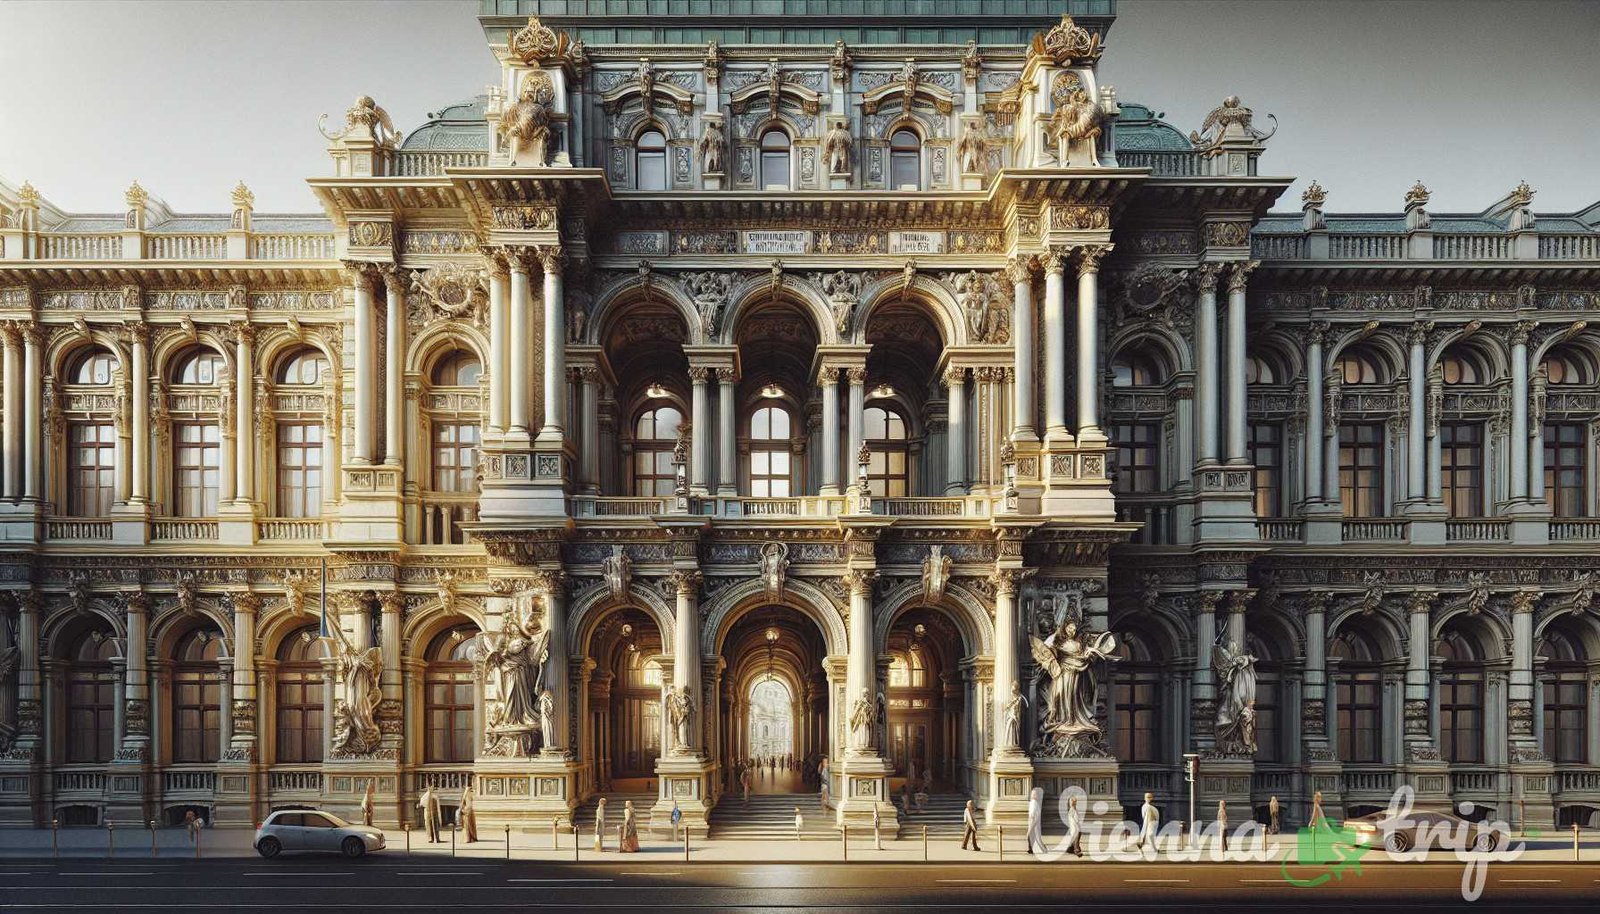 Illustration for section: 5. PALAIS WINTER PALACE Last but not least, we conclude our journey through Vienna's forgotten palat - viennas forgotten palaces